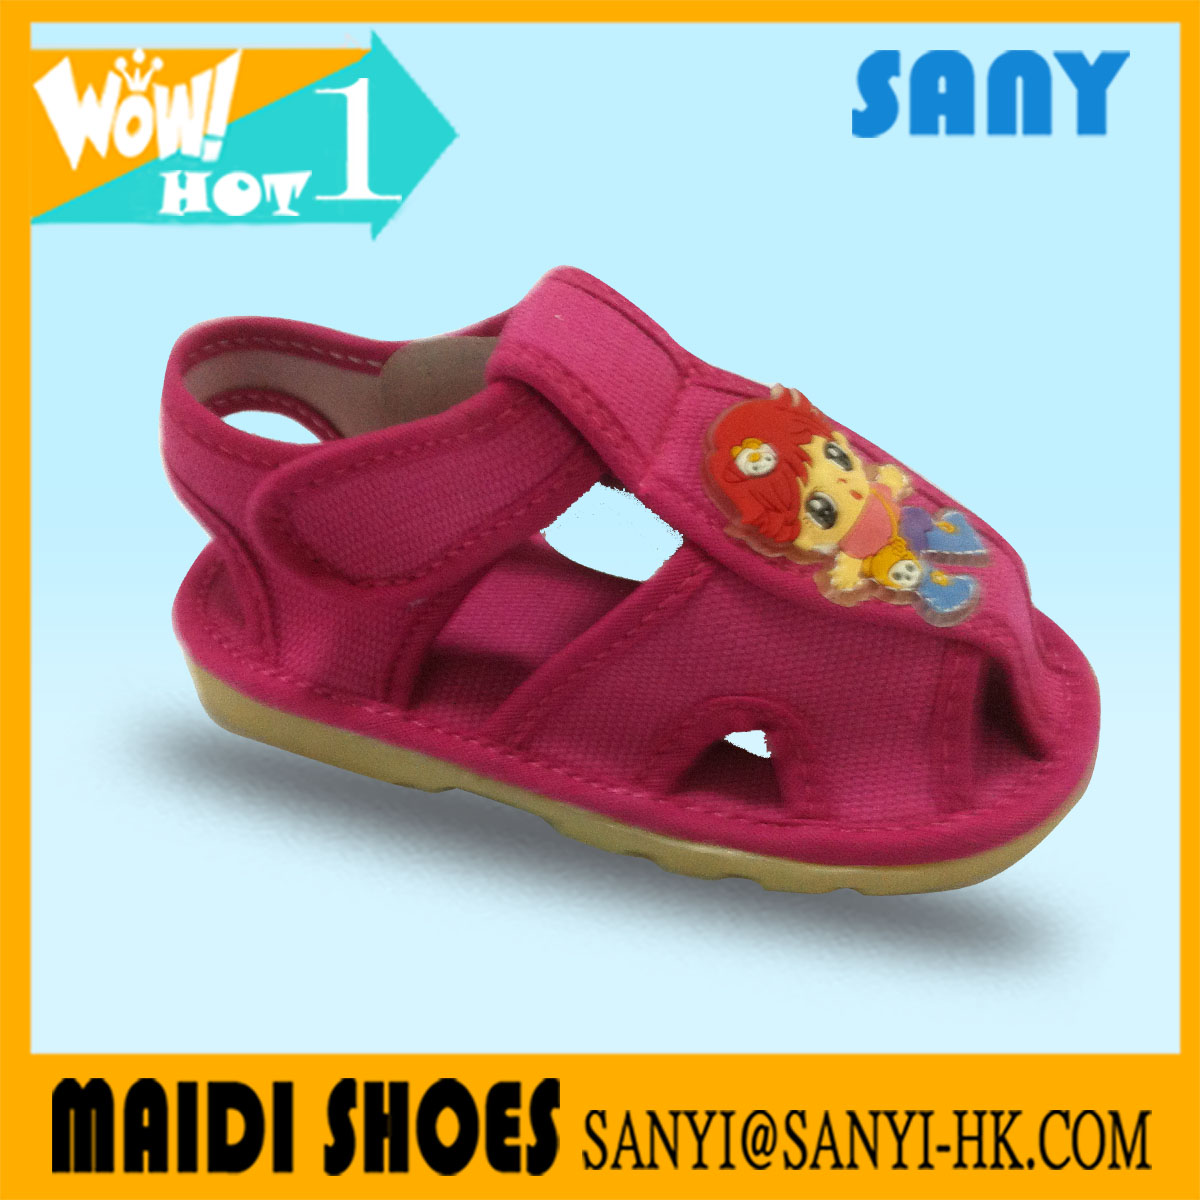 Hot design genuine leather soft sole baby moccasins baby shoes